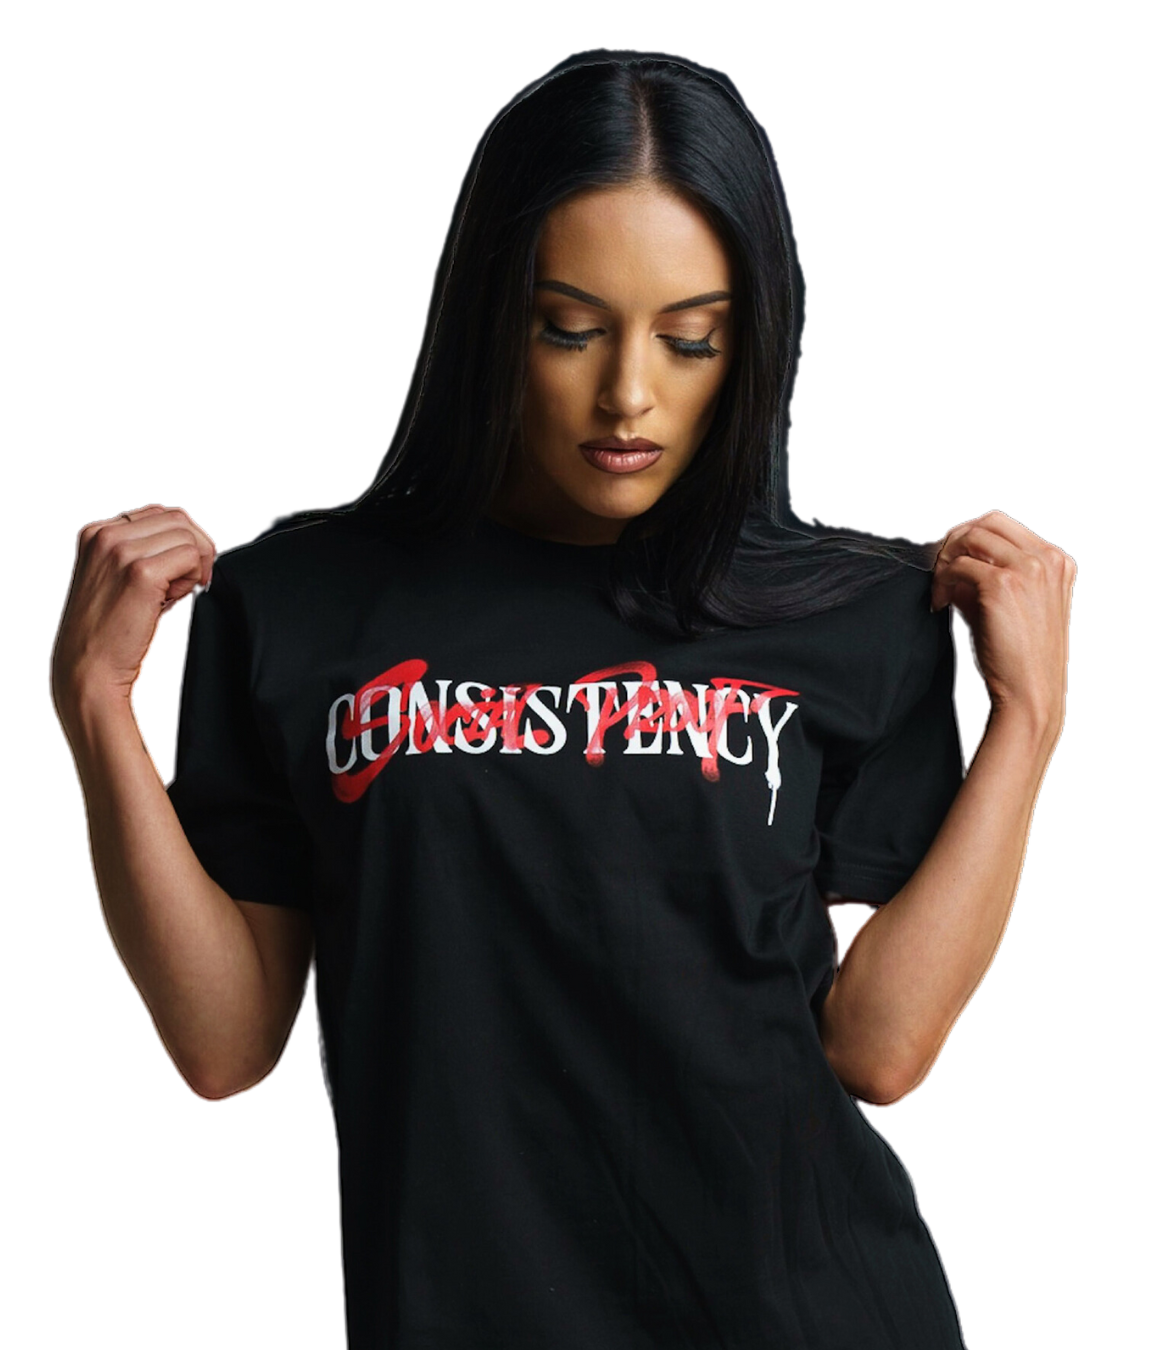 Detailed Fabric View of Consistency Black T-Shirt